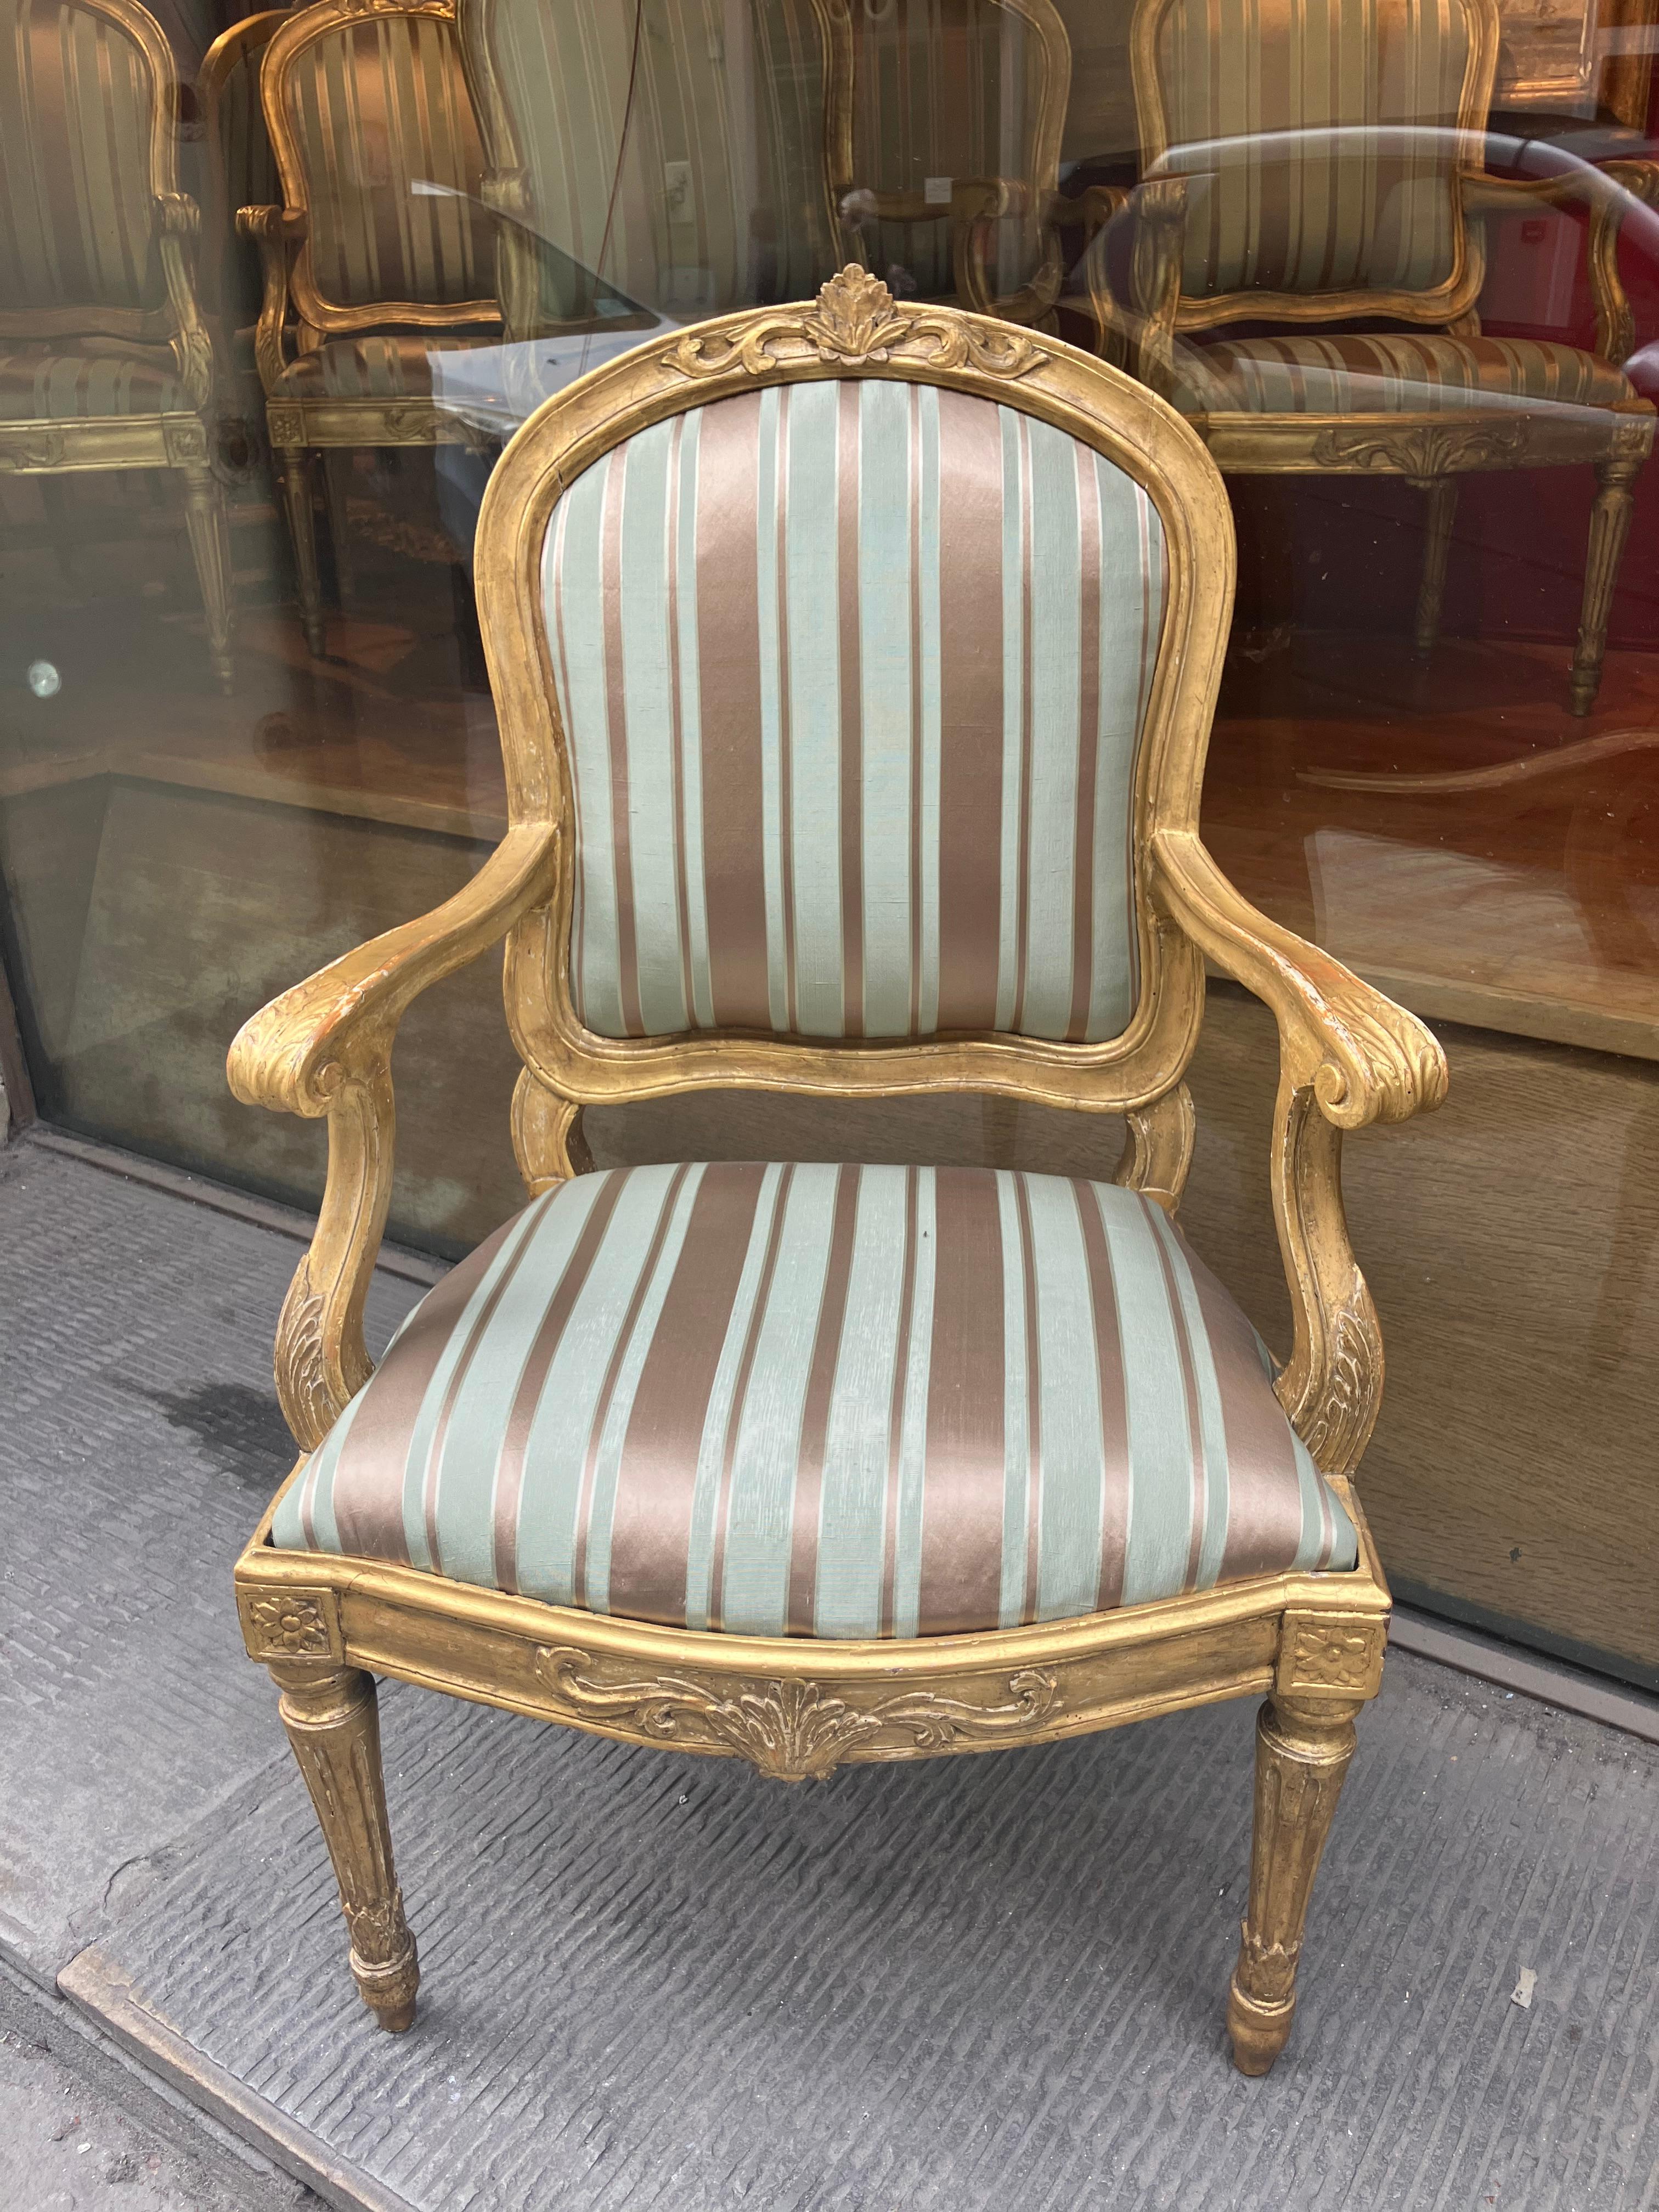 A fabulous set of six antique early 18th century Louis XVI  armchairs, masterfully hand carved and entirely gilded with gold leaf. The curved backrest centered by a sculpted pattern of leaves and scrolls, which are repeated on the apron and on the